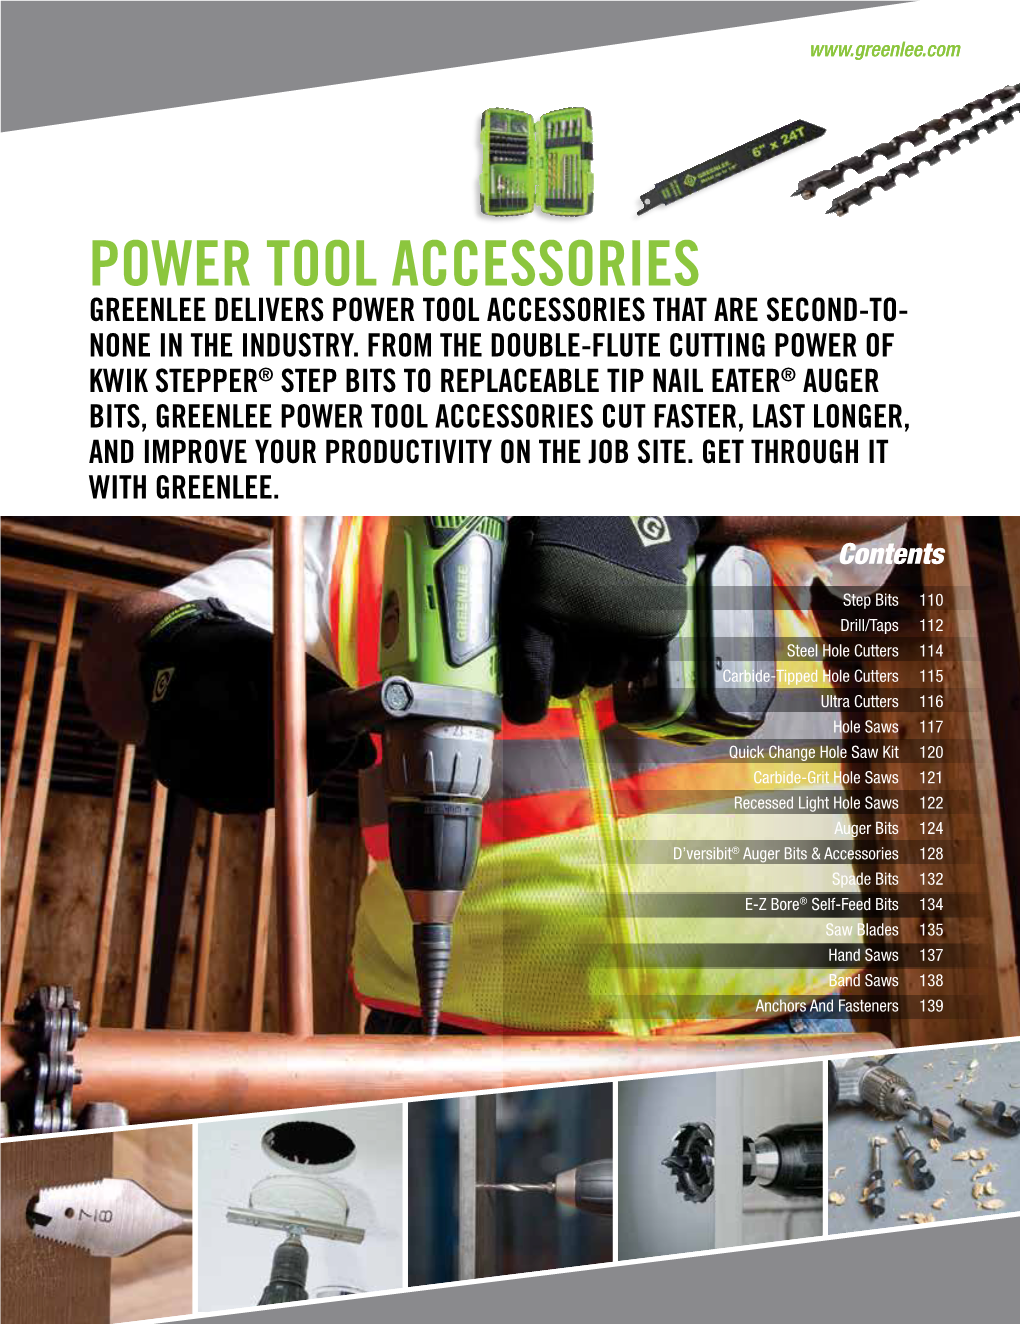 Power Tool Accessories Greenlee Delivers Power Tool Accessories That Are Second-To- None in the Industry